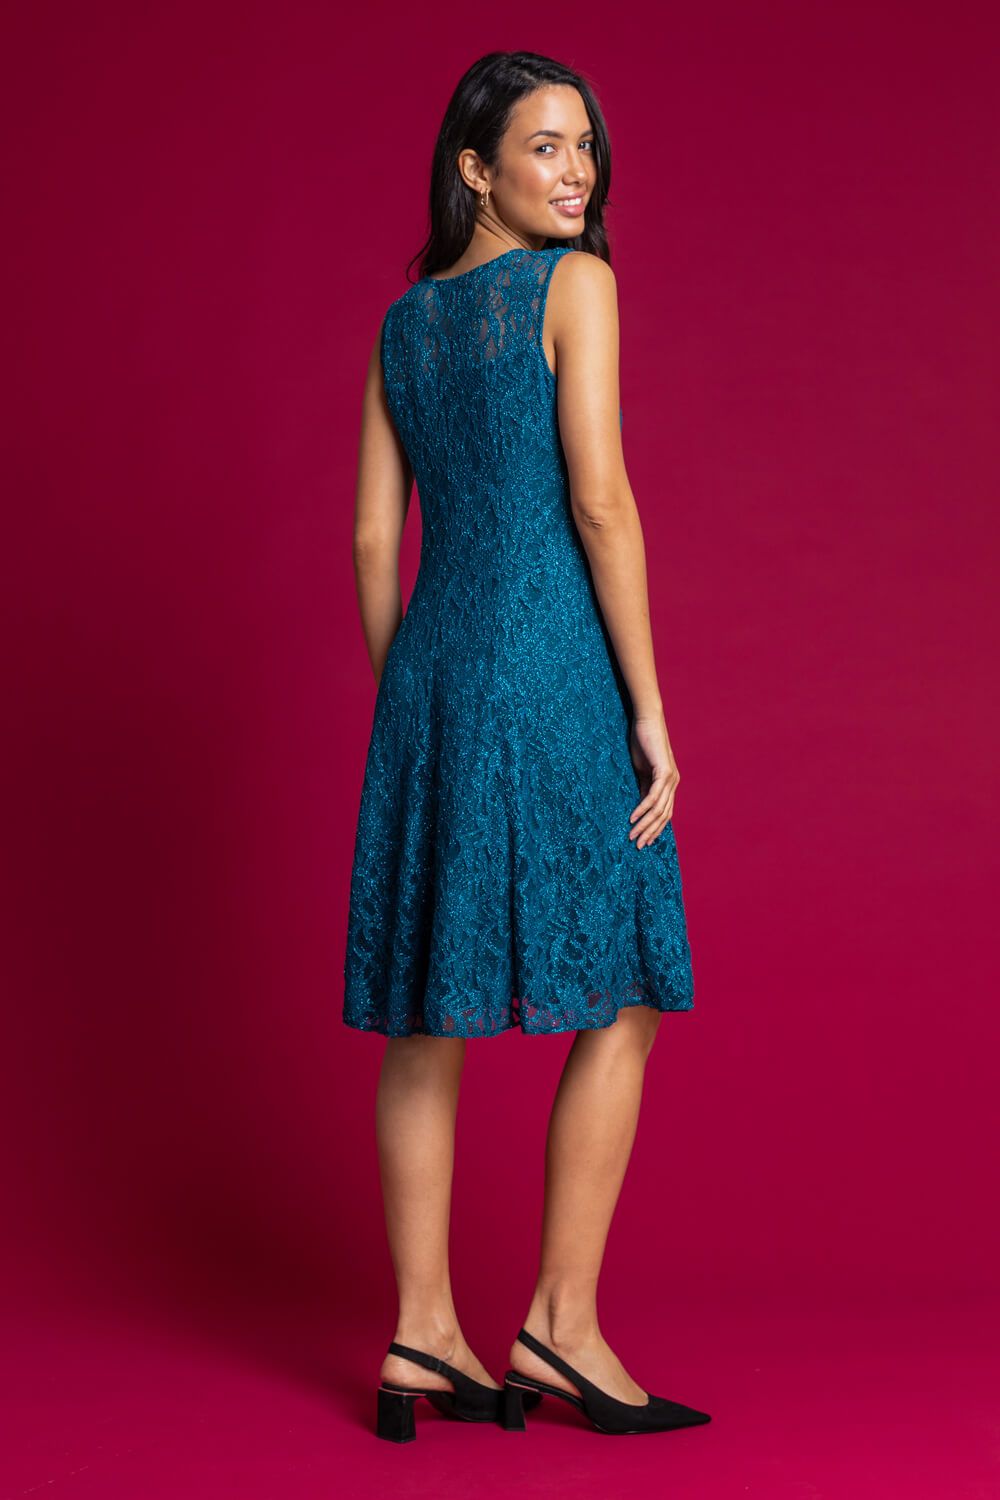 Glitter Lace Fit And Flare Dress in Teal - Roman Originals UK